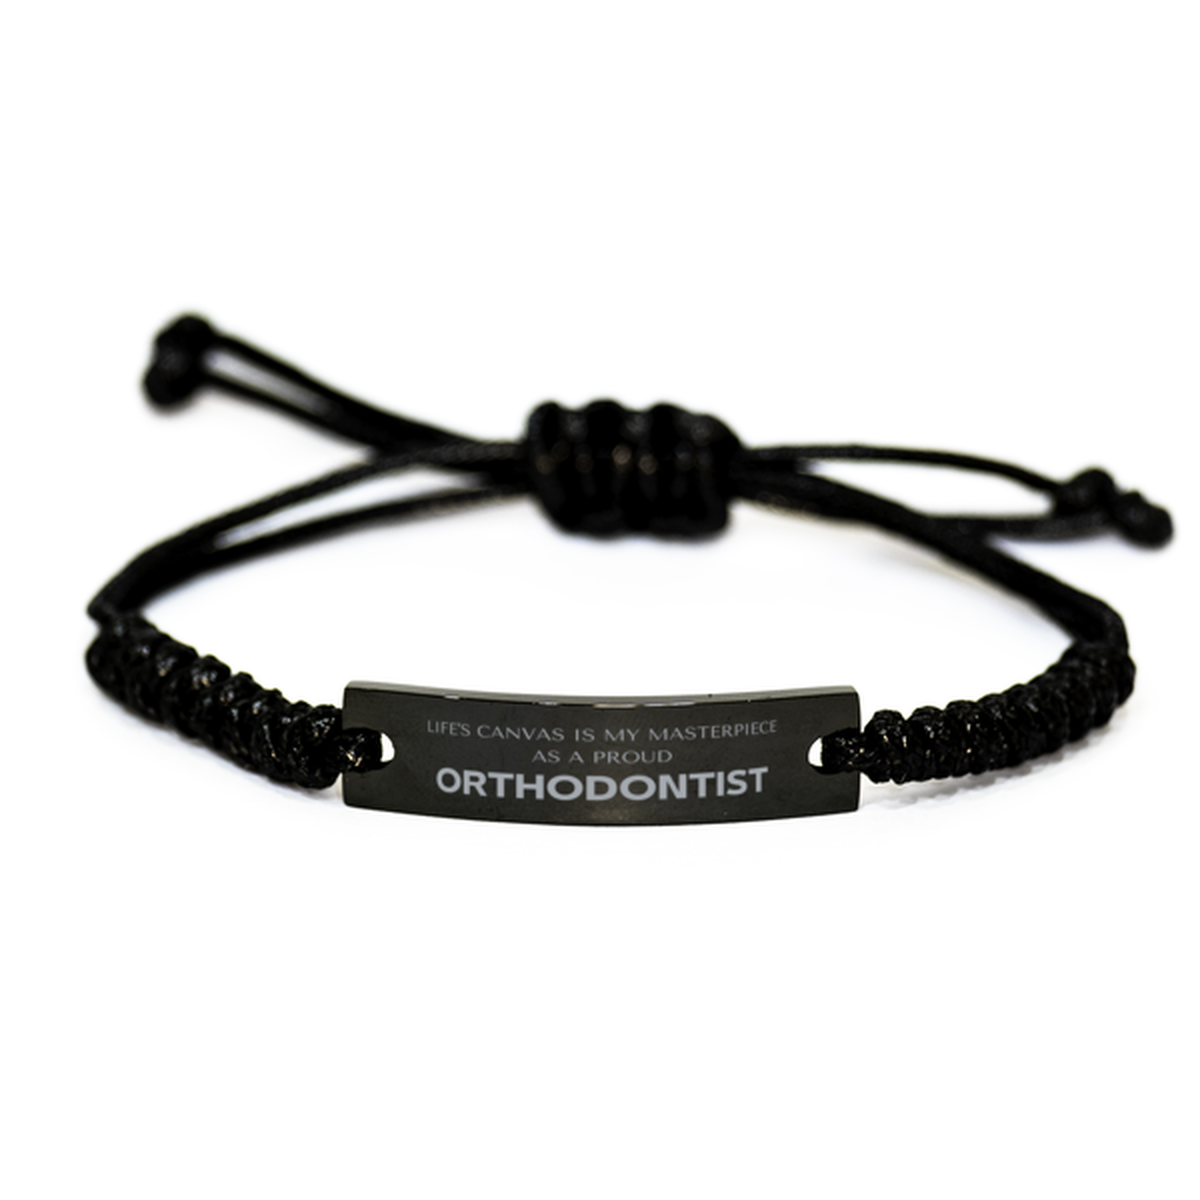 Proud Orthodontist Gifts, Life's canvas is my masterpiece, Epic Birthday Christmas Unique Black Rope Bracelet For Orthodontist, Coworkers, Men, Women, Friends